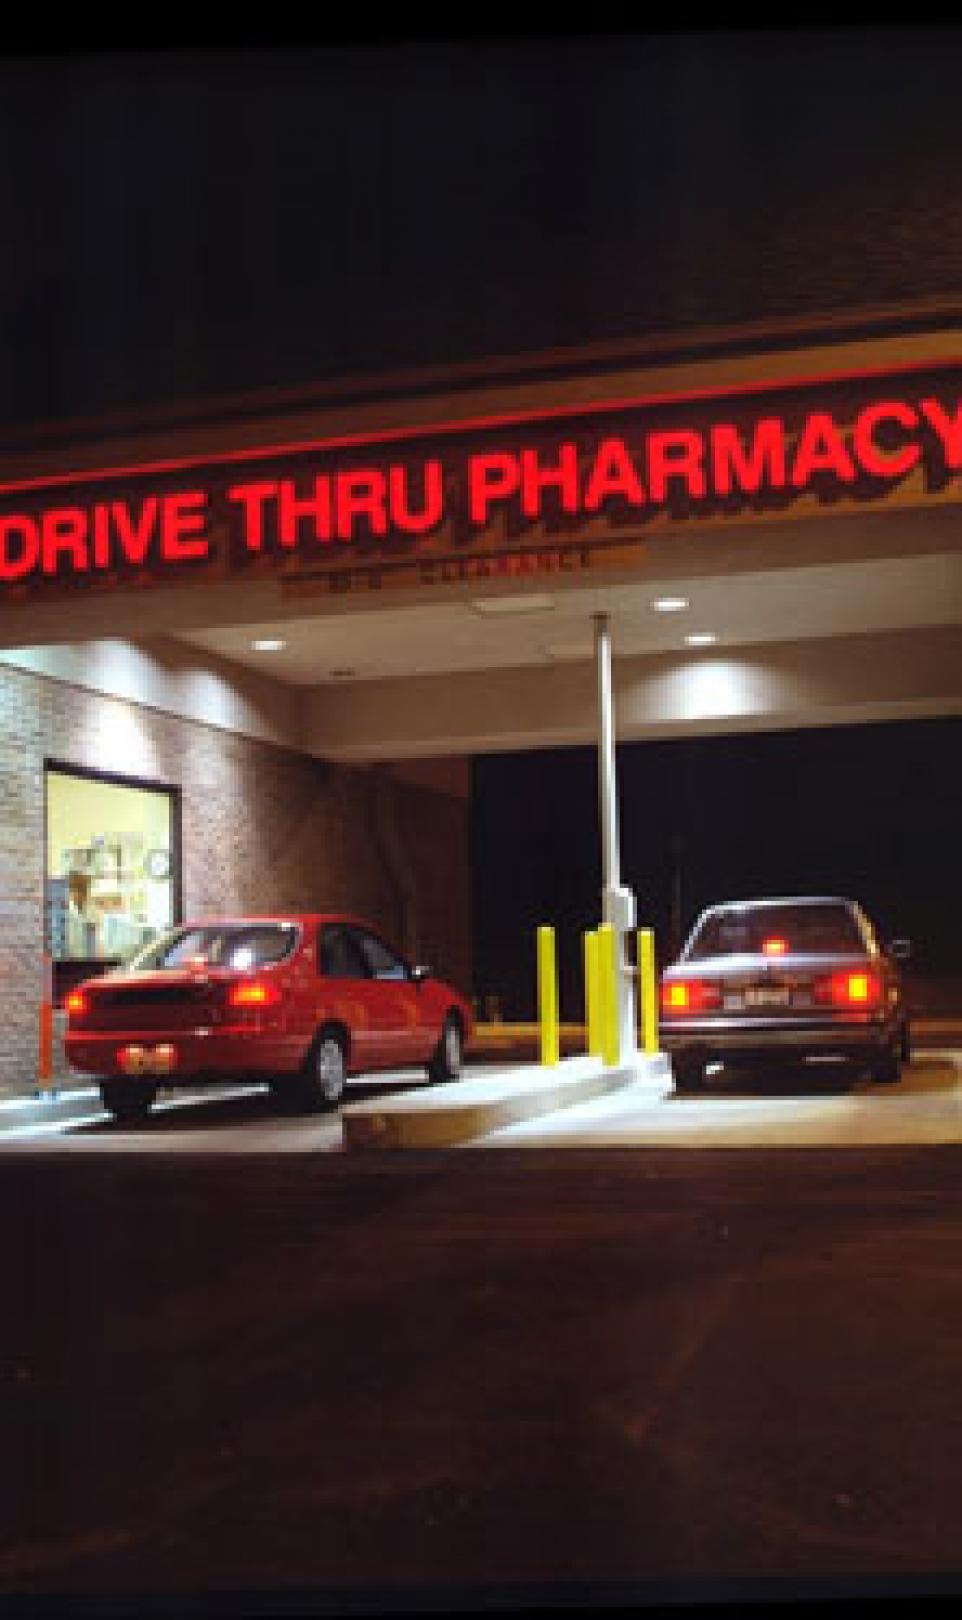 Outside view of a Walgreens drugstore with a drive-thru pharmacy